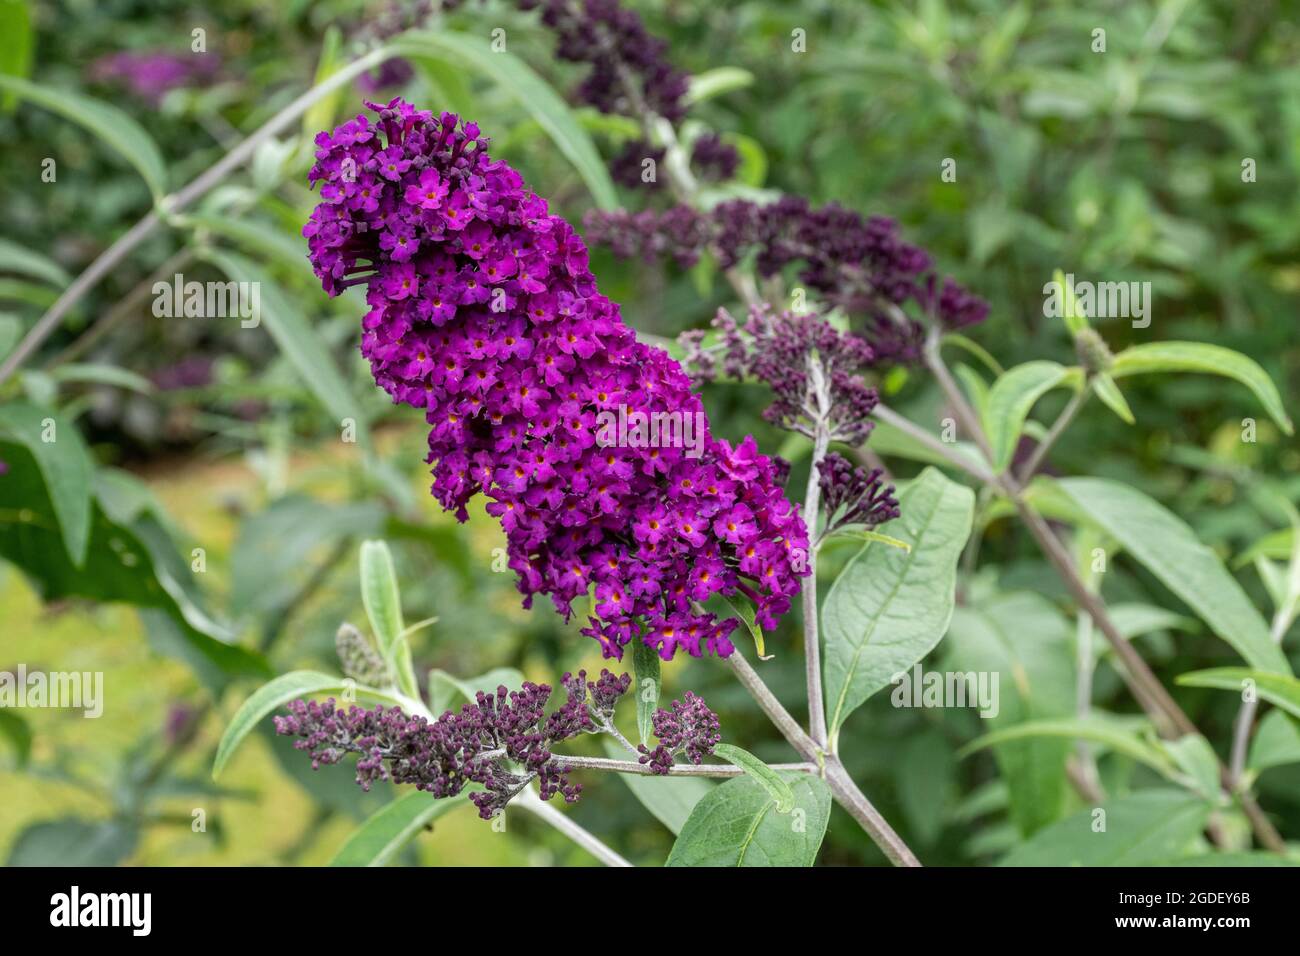 Buddleja davidii Royal Red (buddleia variety), known as a butterfly bush, in flower during august or summer, UK Stock Photo